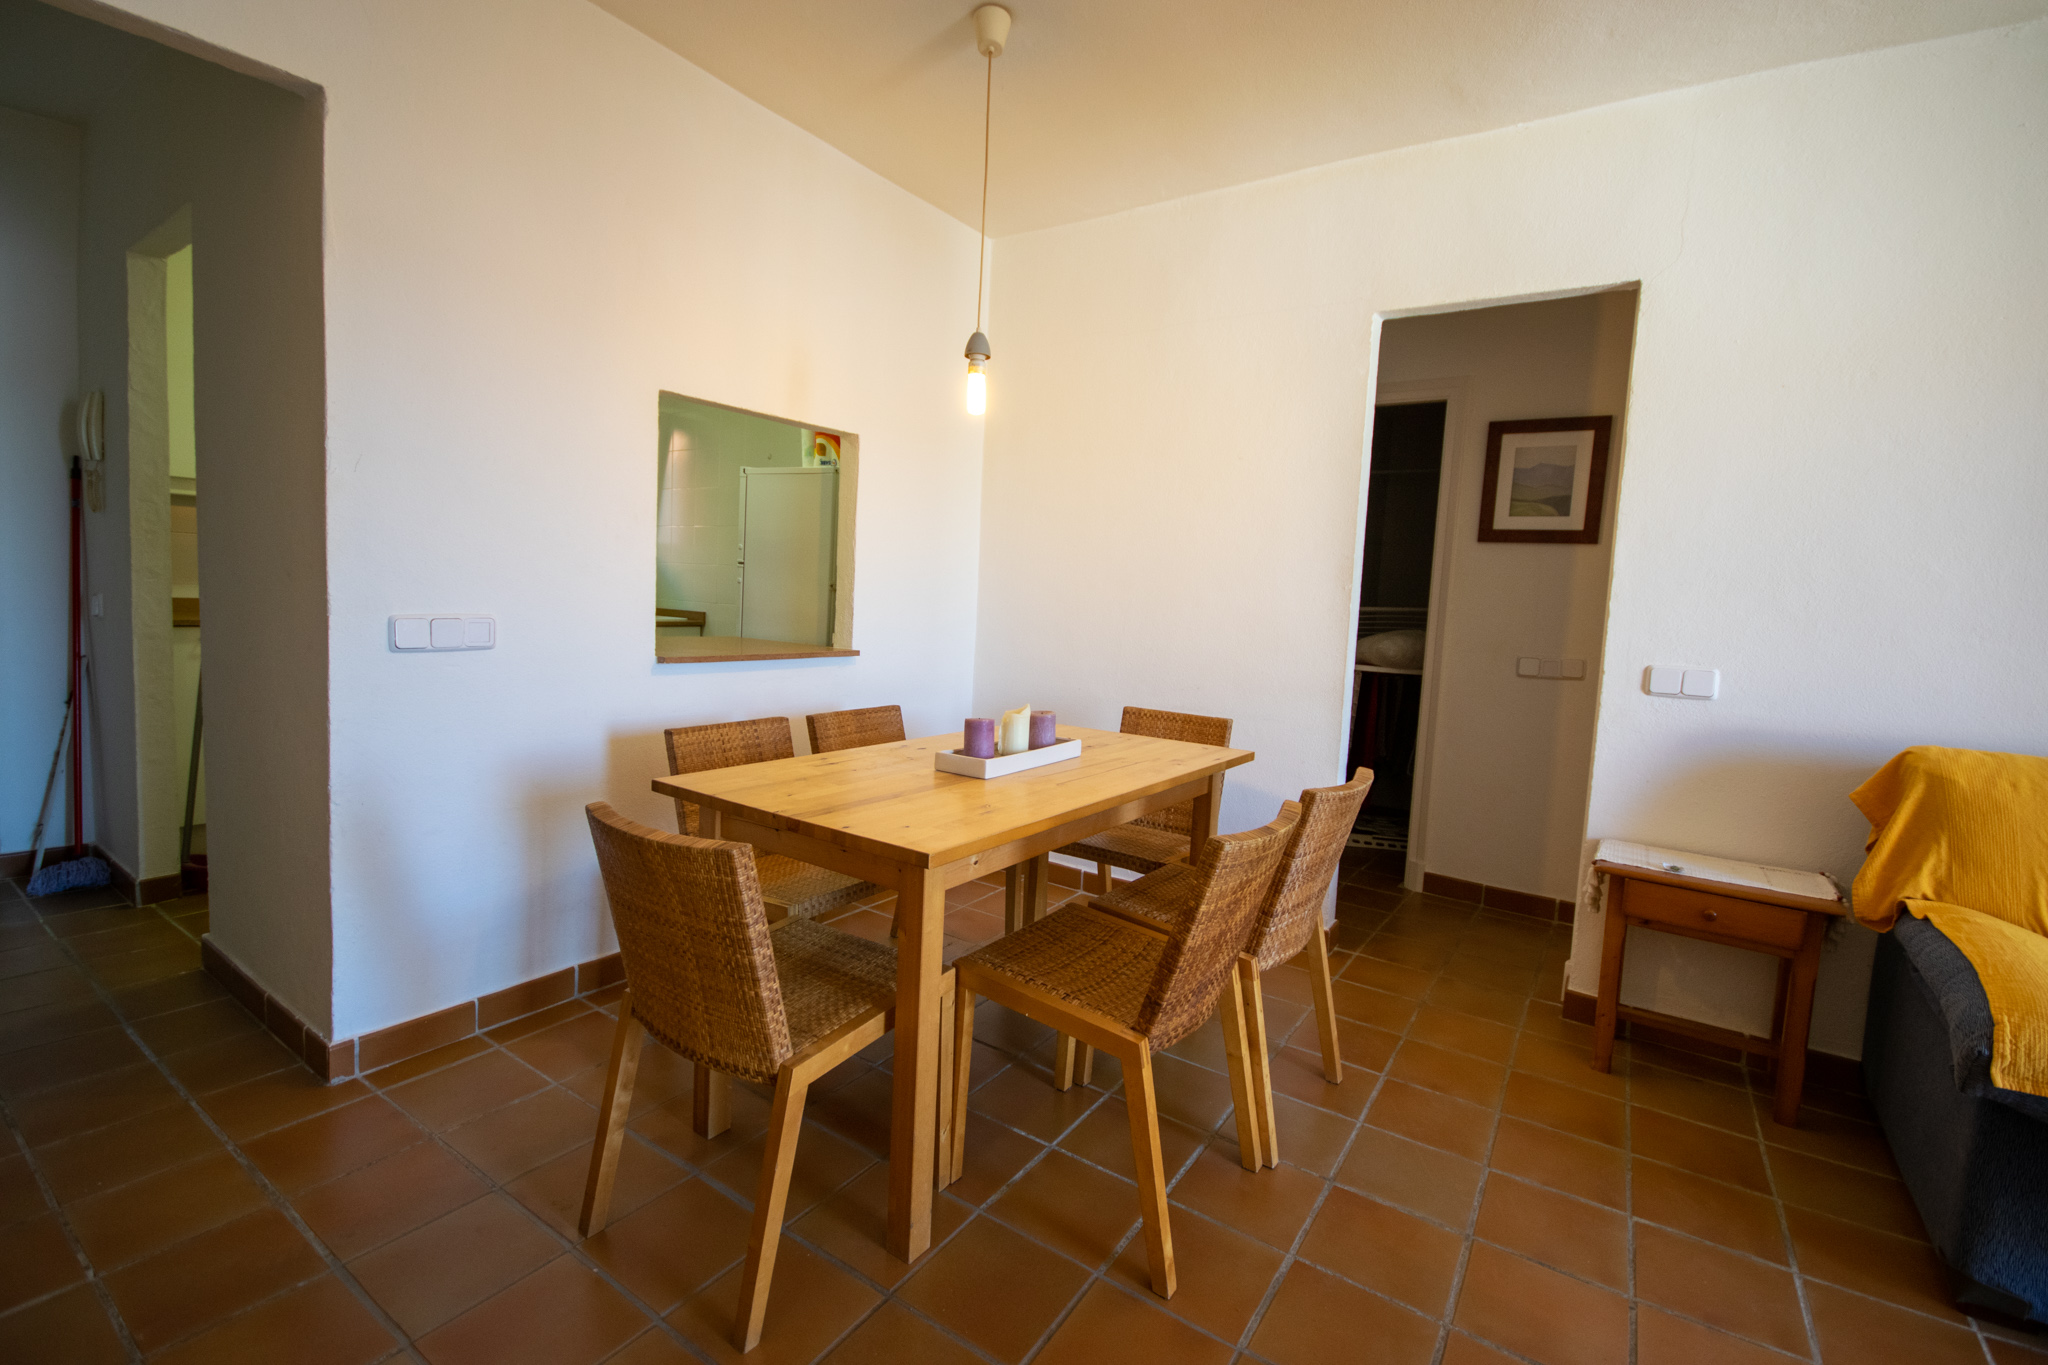 2-bedroom living-dining room with terrace for sale in Es Mercadal